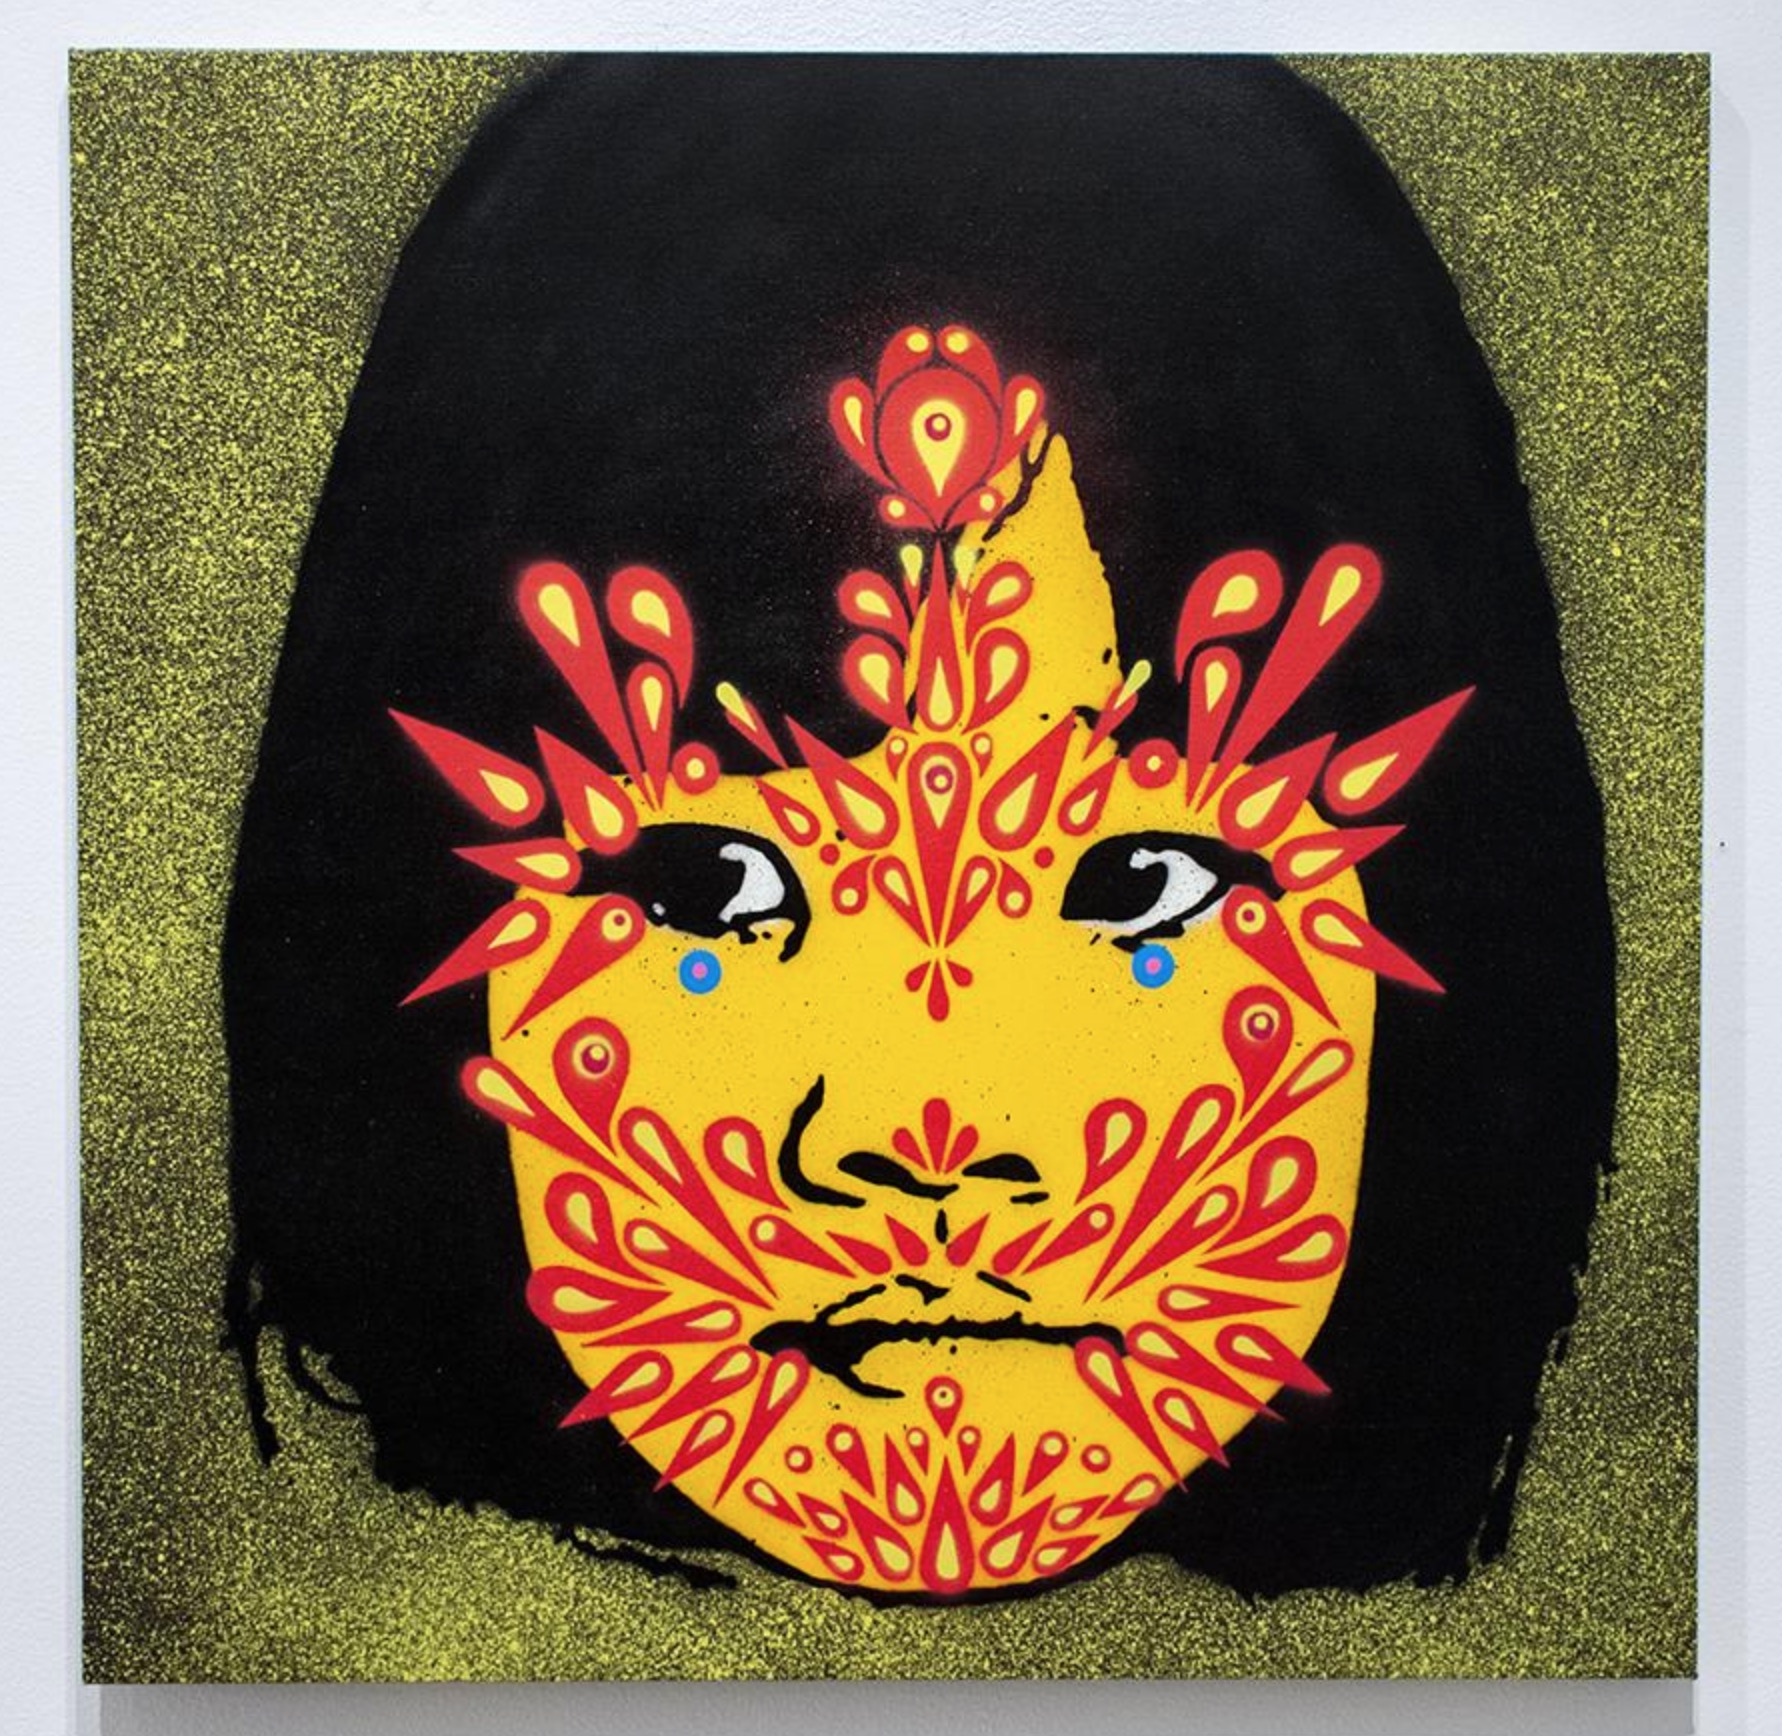 "Ho Ghi Minh Girl,” 2019. Spraypaint on canvas. 30 x 30 in., 76 x 76 cm.